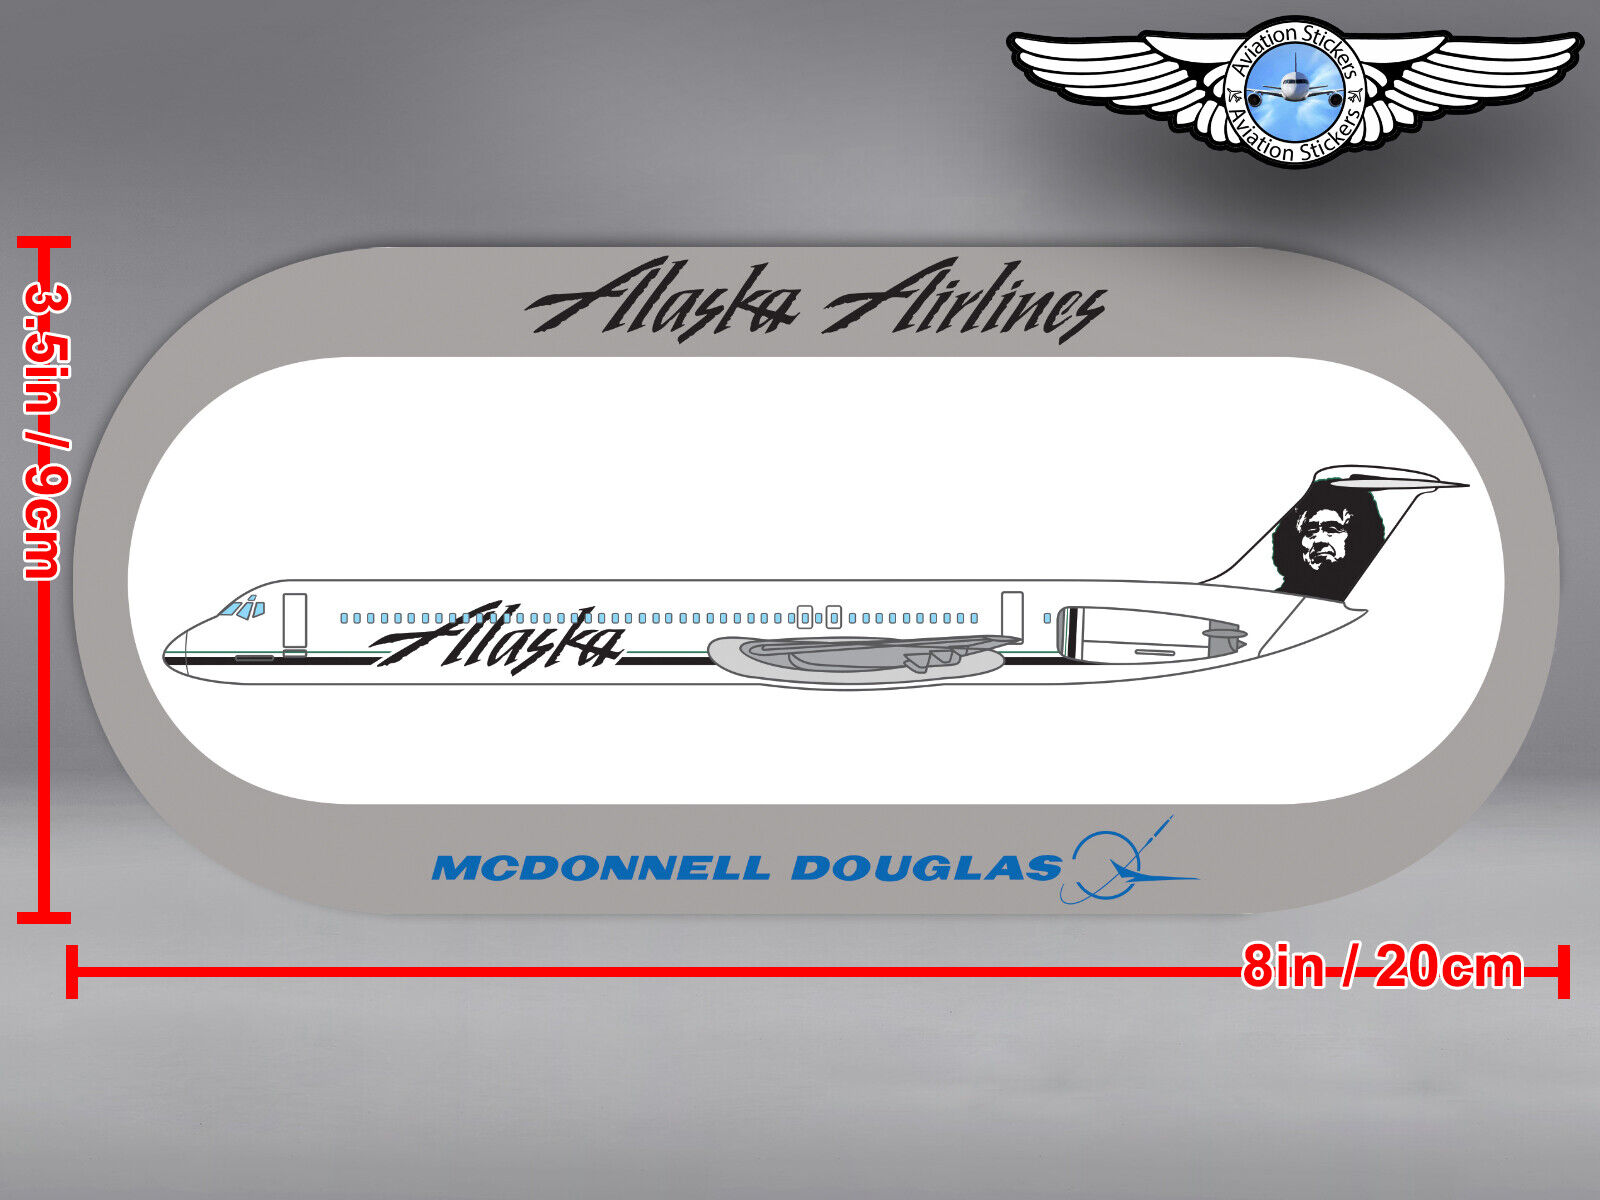 ALASKA AIRLINES ROUNDED RECTANGULAR MCDONNELL DOUGLAS MD80 MD 80 STICKER DECAL